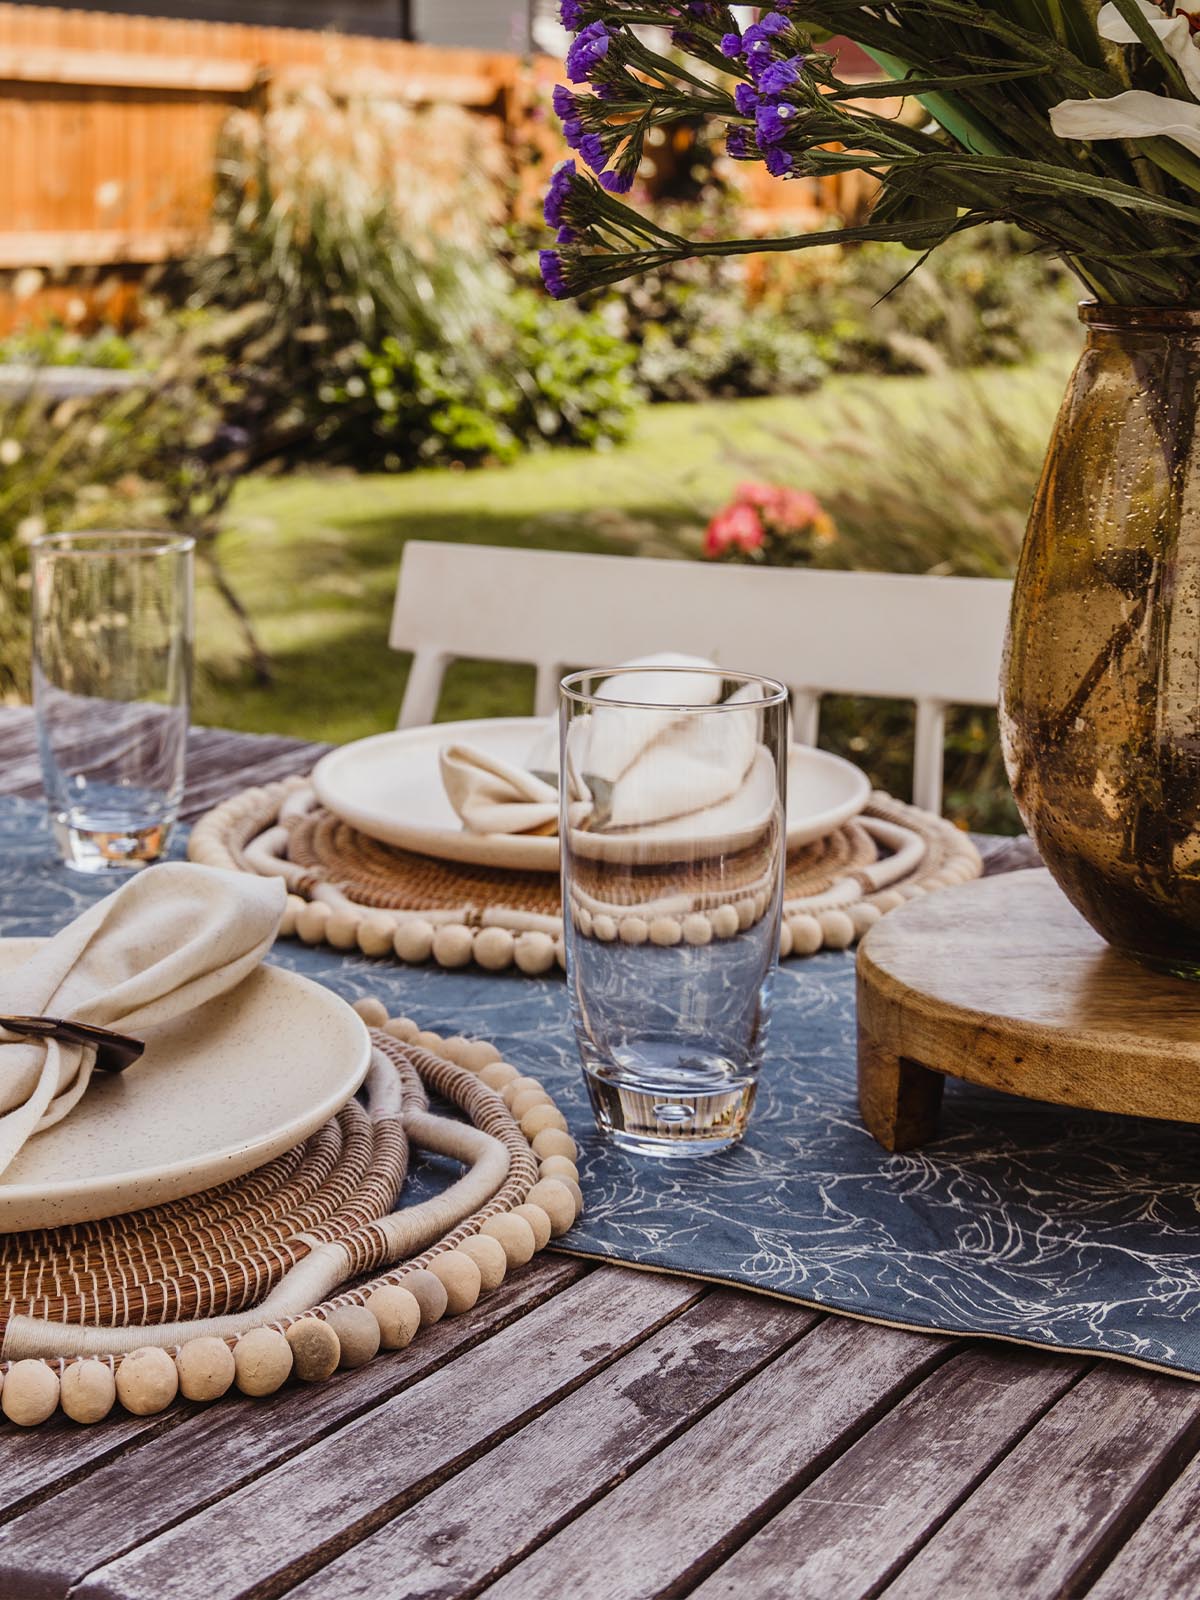 Place settings with plates and glasses on hibiscus table runner on a wooden table outside.